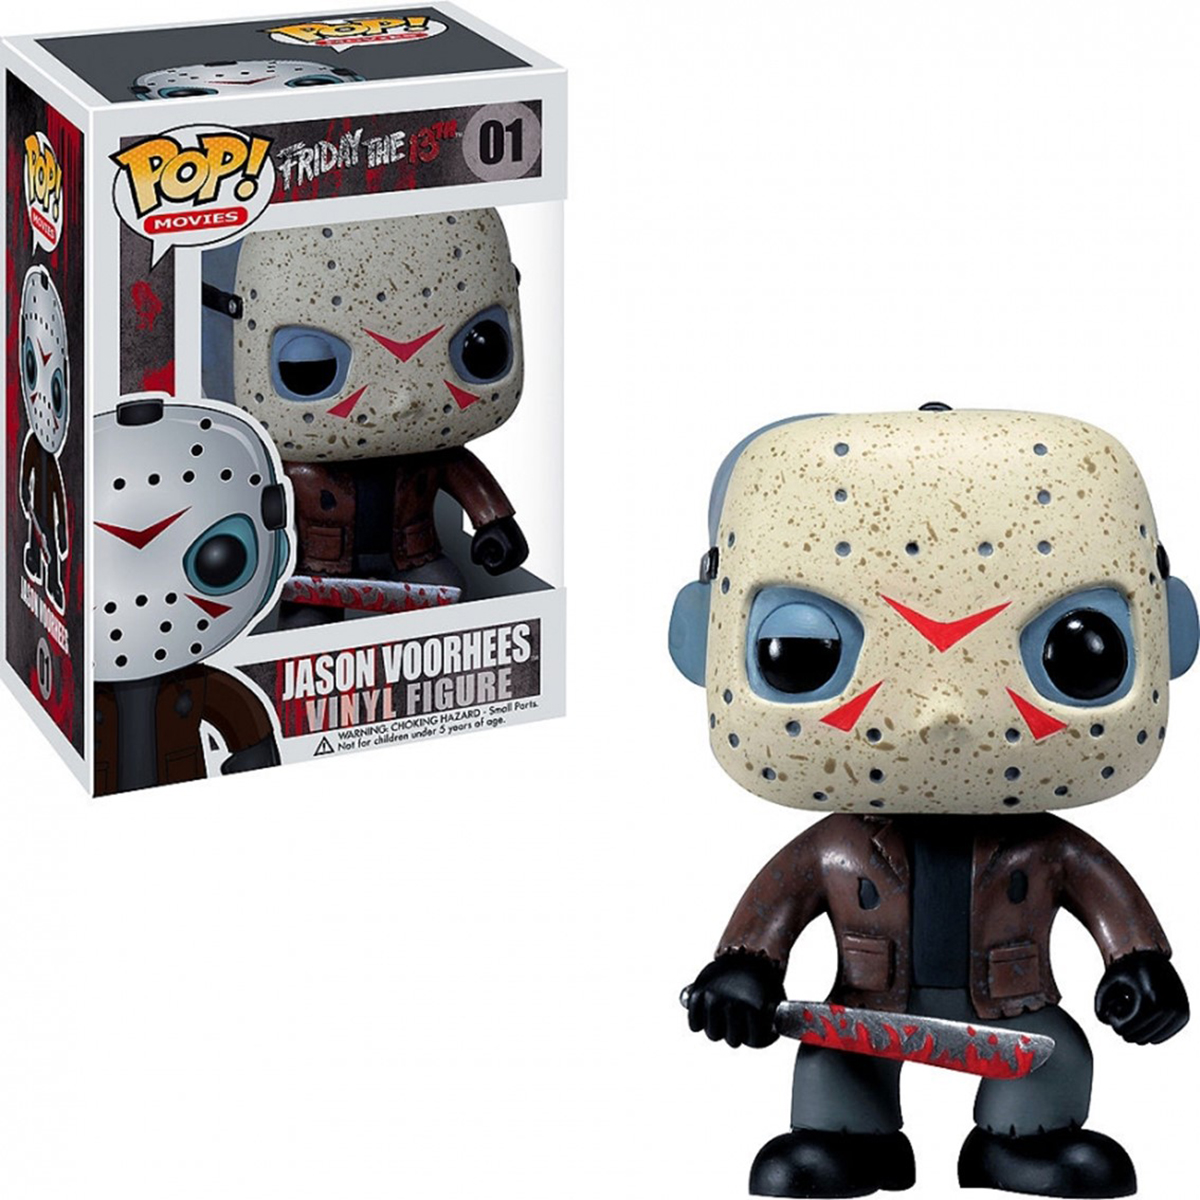 POP Horror - - 13th Friday Voorhees The Jason